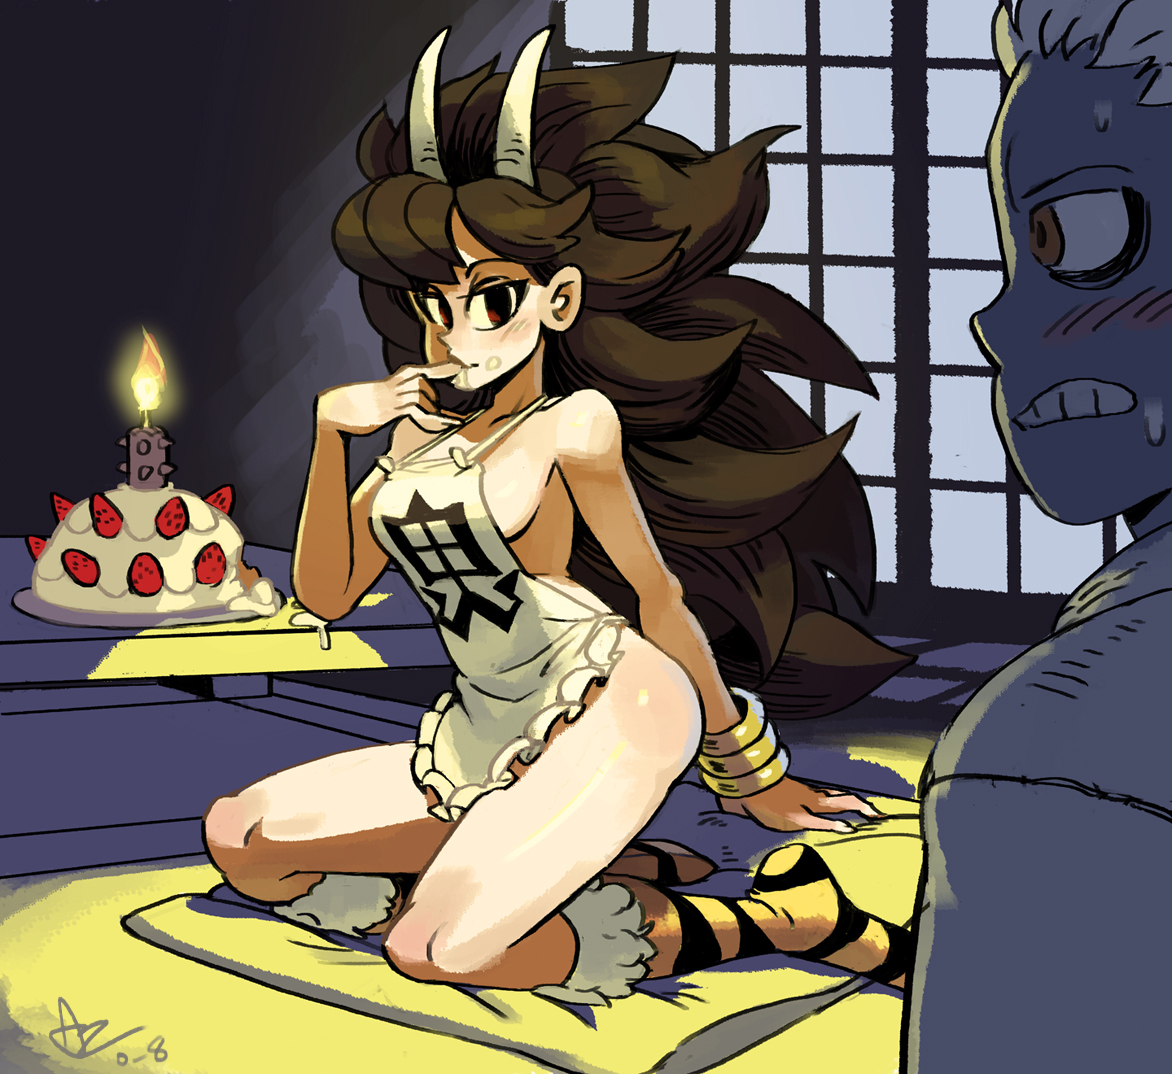 Happy 20th Anniversary to Vanillaware ! Their works have been a huge source of inspiration over the years. It's crazy to think it's been that long. Here's to many more years! m(_)m 

#ヴァニラウェア20周年 